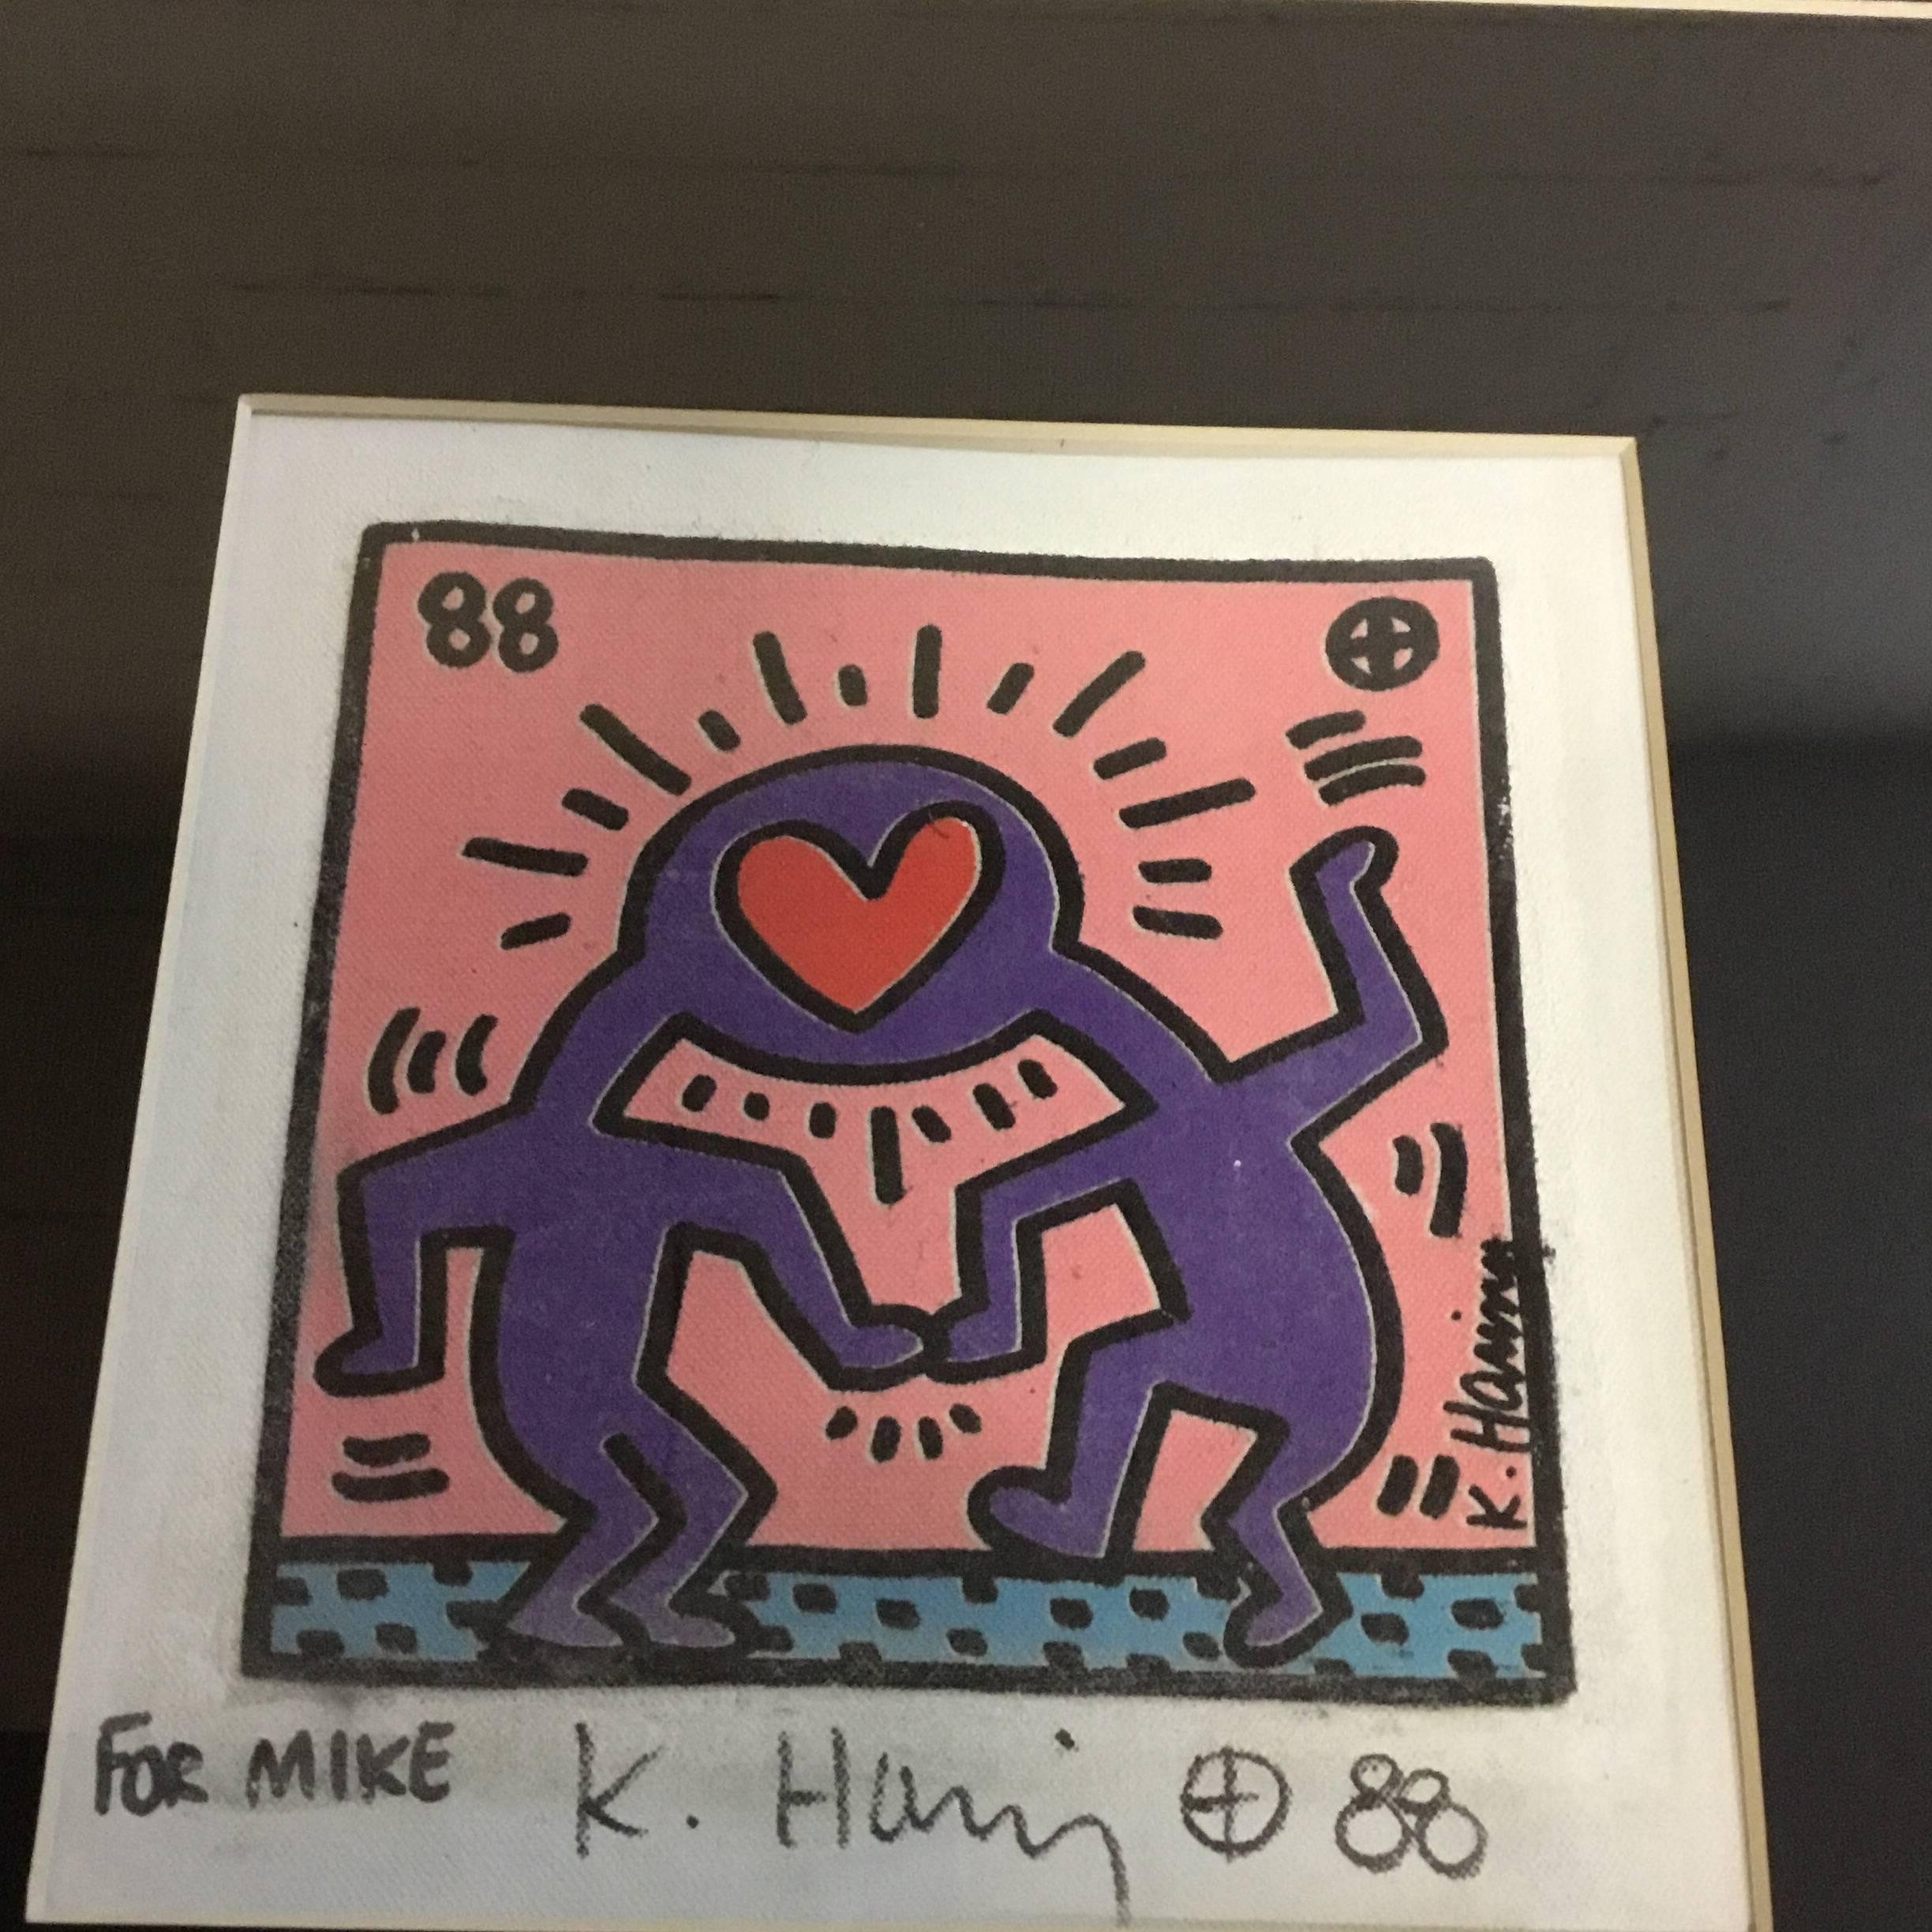 Keith Haring realized this invitation for a friend's wedding, Mike, hand signed by Keith.
Screen-print on canvas
1988